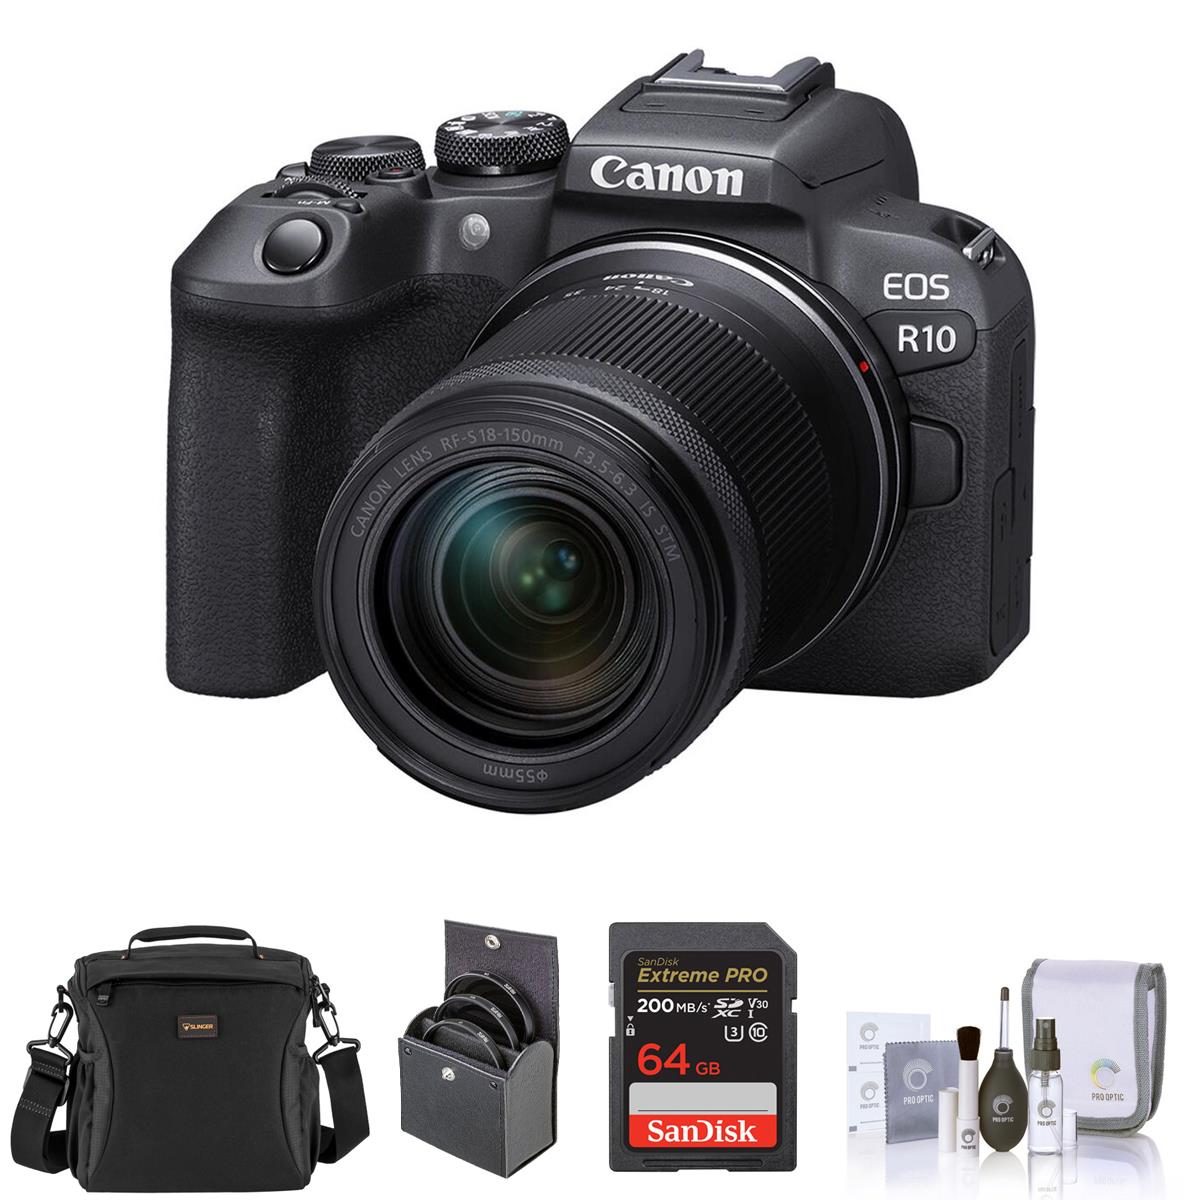 Image of Canon EOS R10 Mirrorless Camera with 18-150mm Lens with Accessories Kit